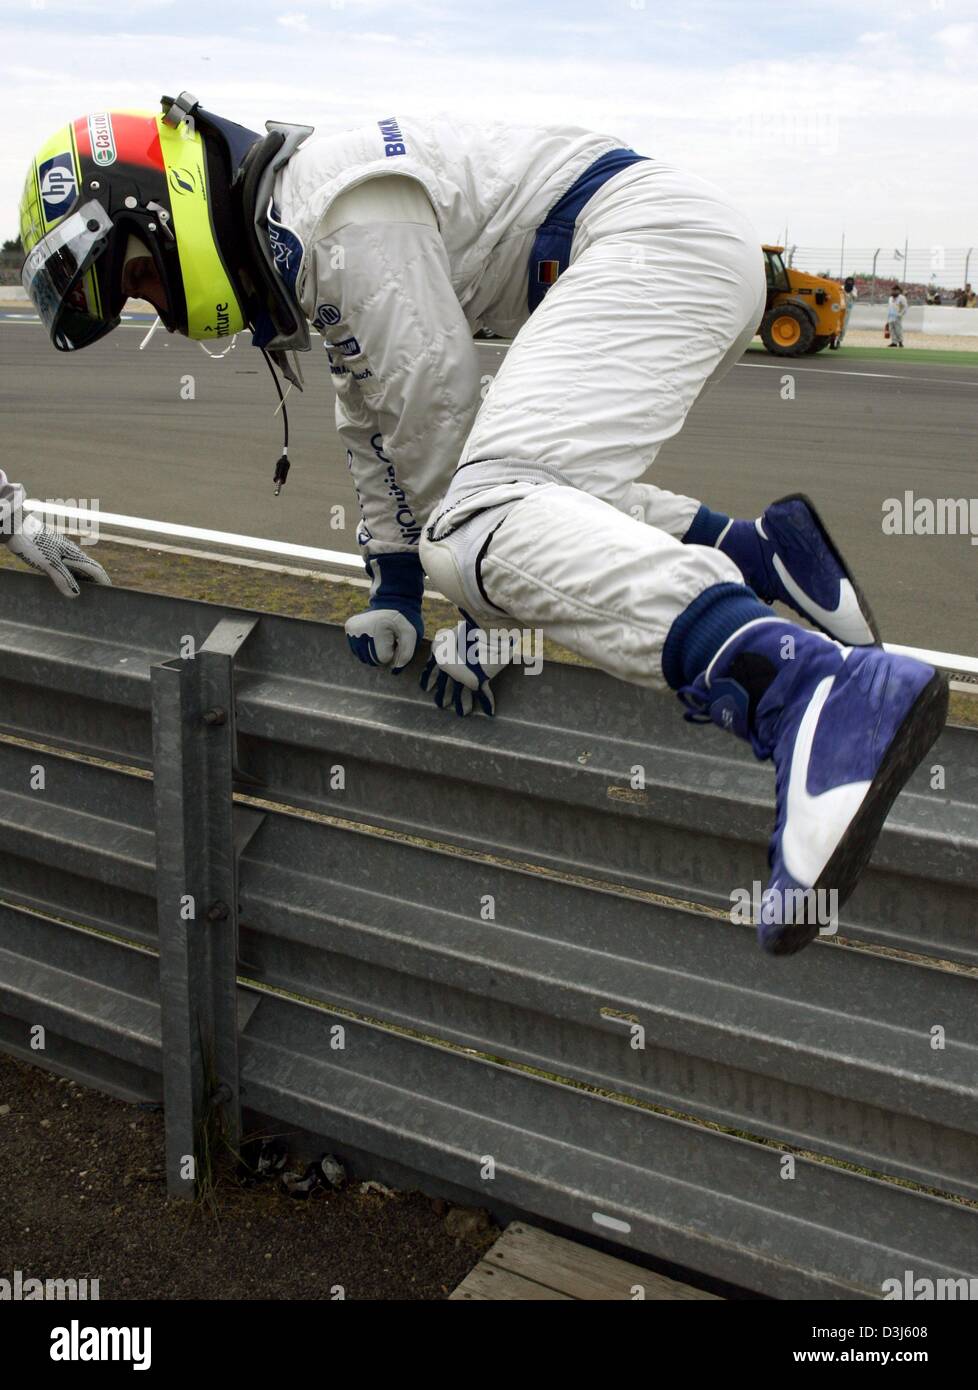 (dpa) - German formula one pilot Ralf Schumacher (BMW-Williams) climbs over the crash barrier after his accident during the European Grand Prix at the Nuerburgring race track in Germany, 30 May 2004. Stock Photo